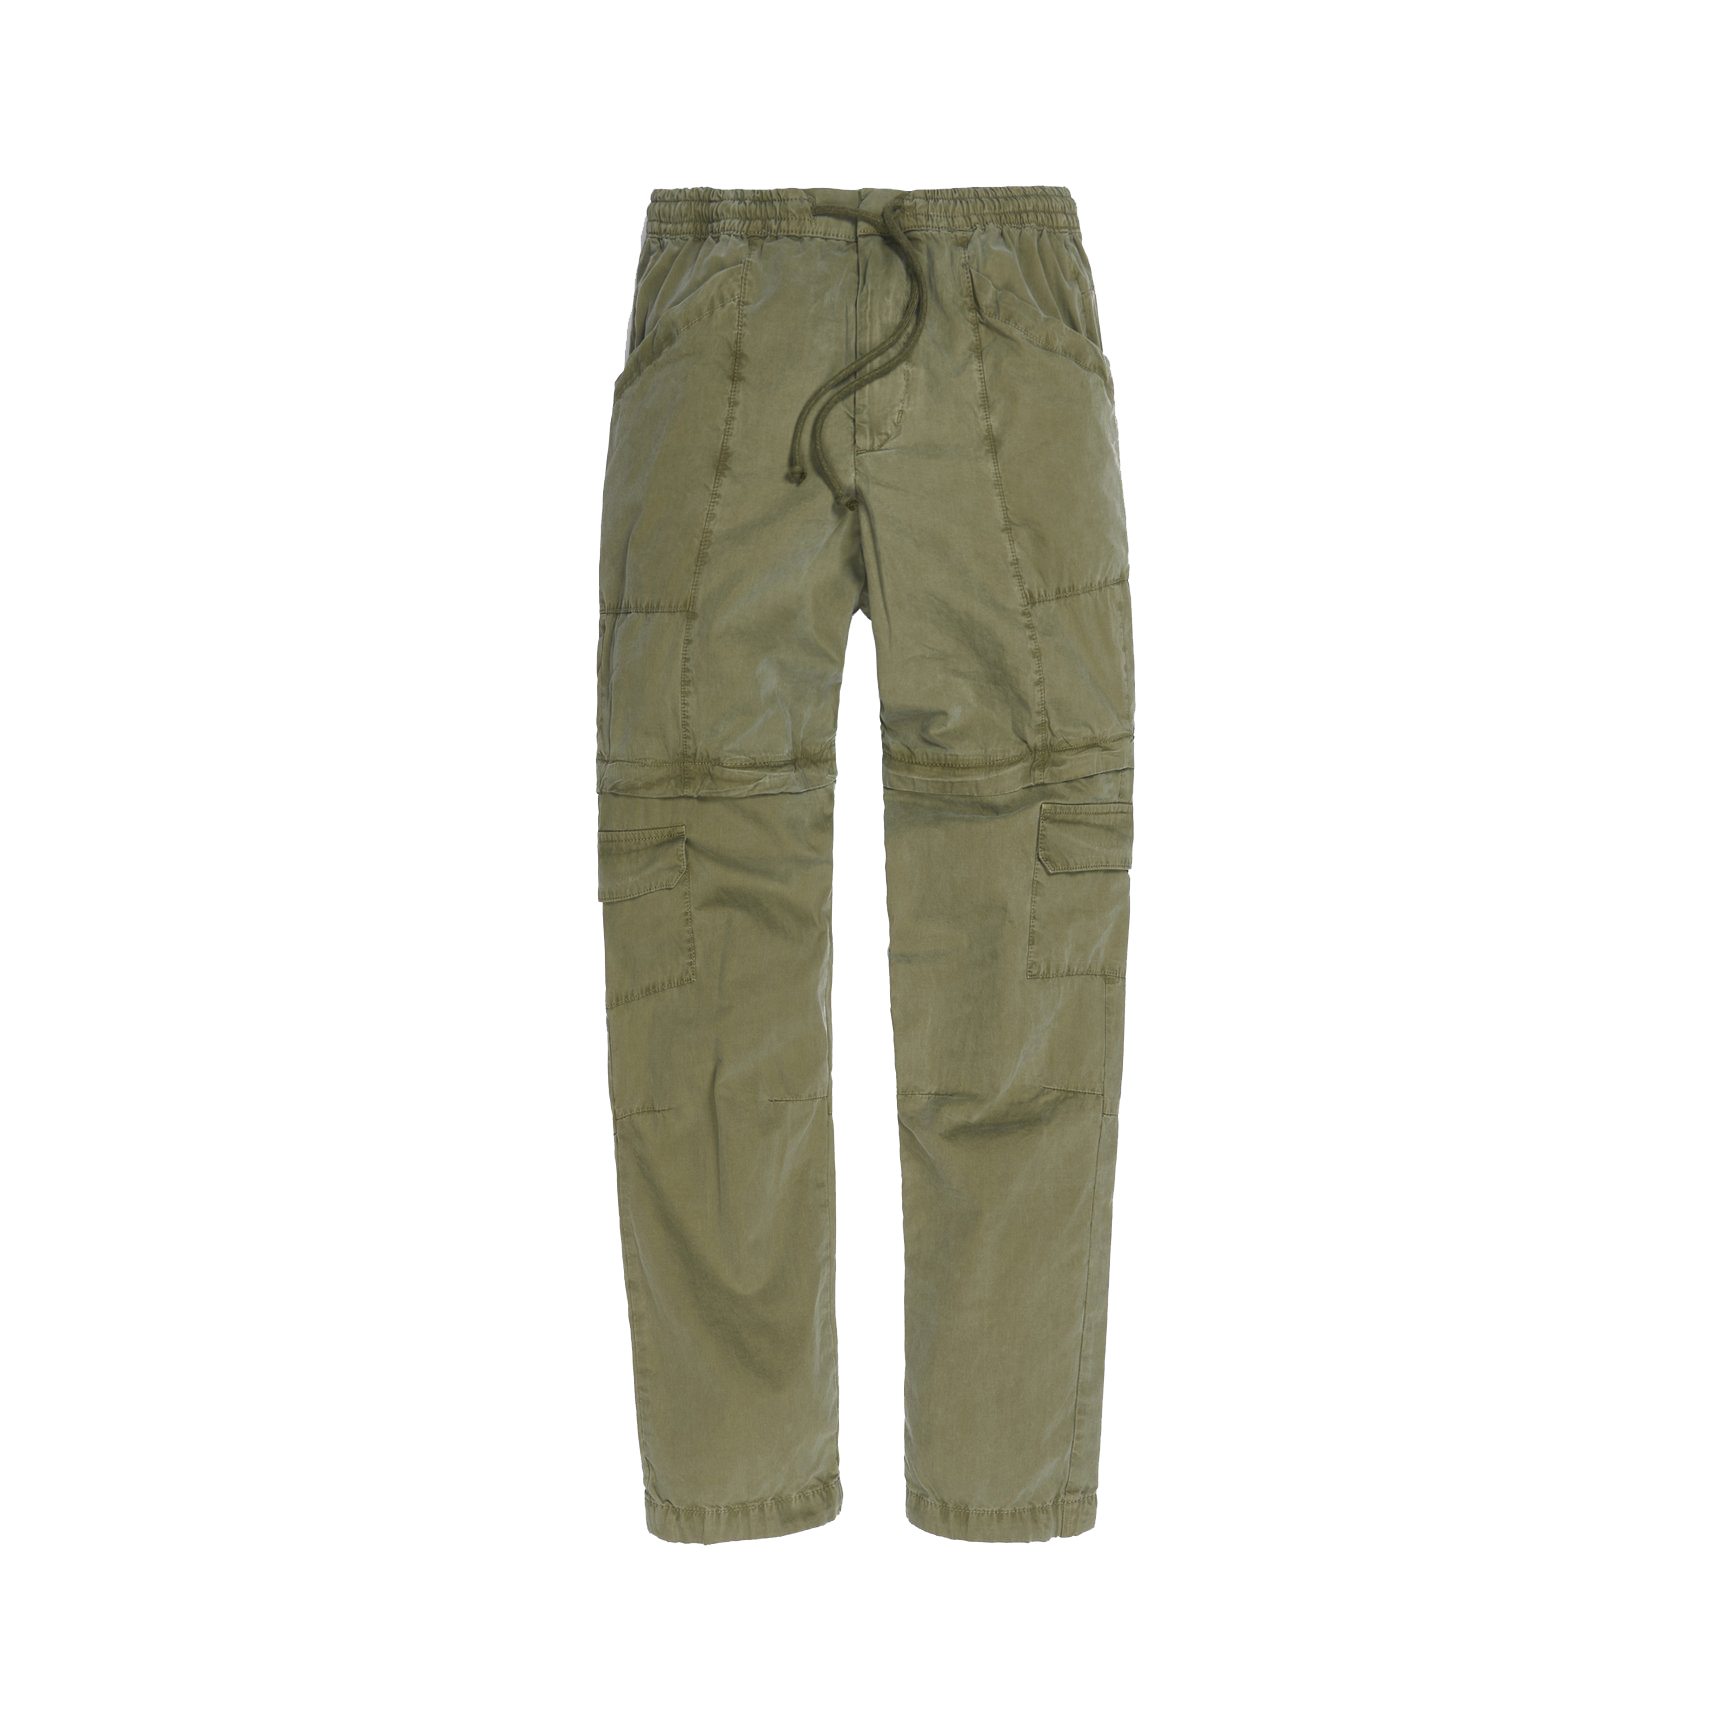 Kith Convertible Cargo Pant Olive Men's - FW20 - GB